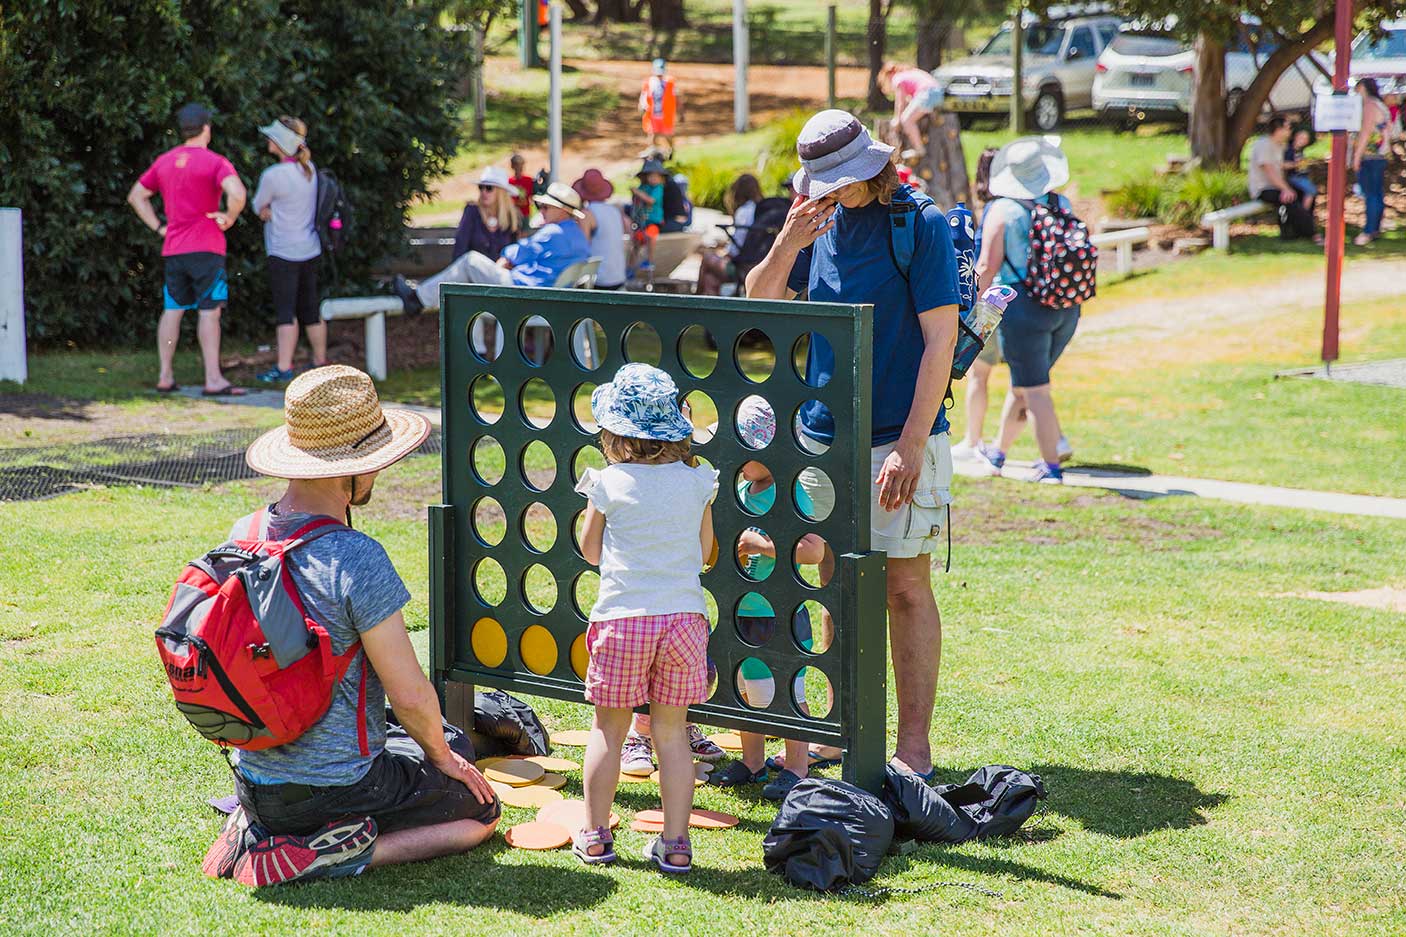 A family playing a giant game of Connect 4 on the grass